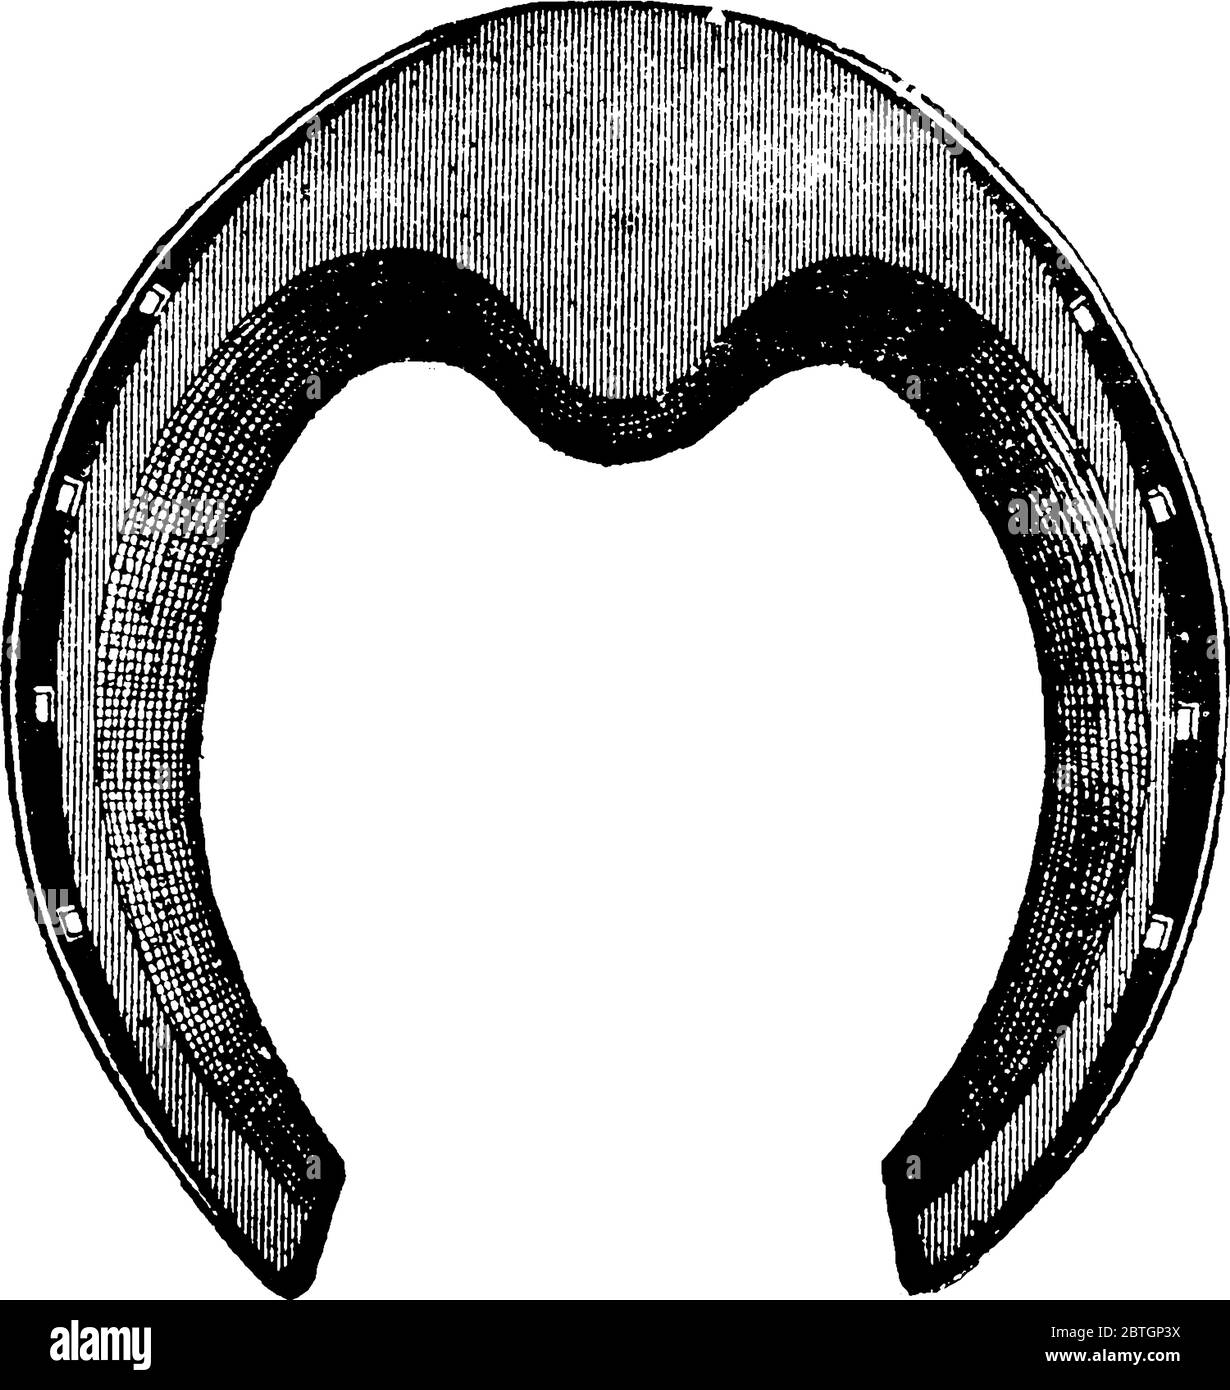 Horseshoe is a u-shaped metal plate by which horses’ hooves are protected., vintage line drawing or engraving illustration. Stock Vector